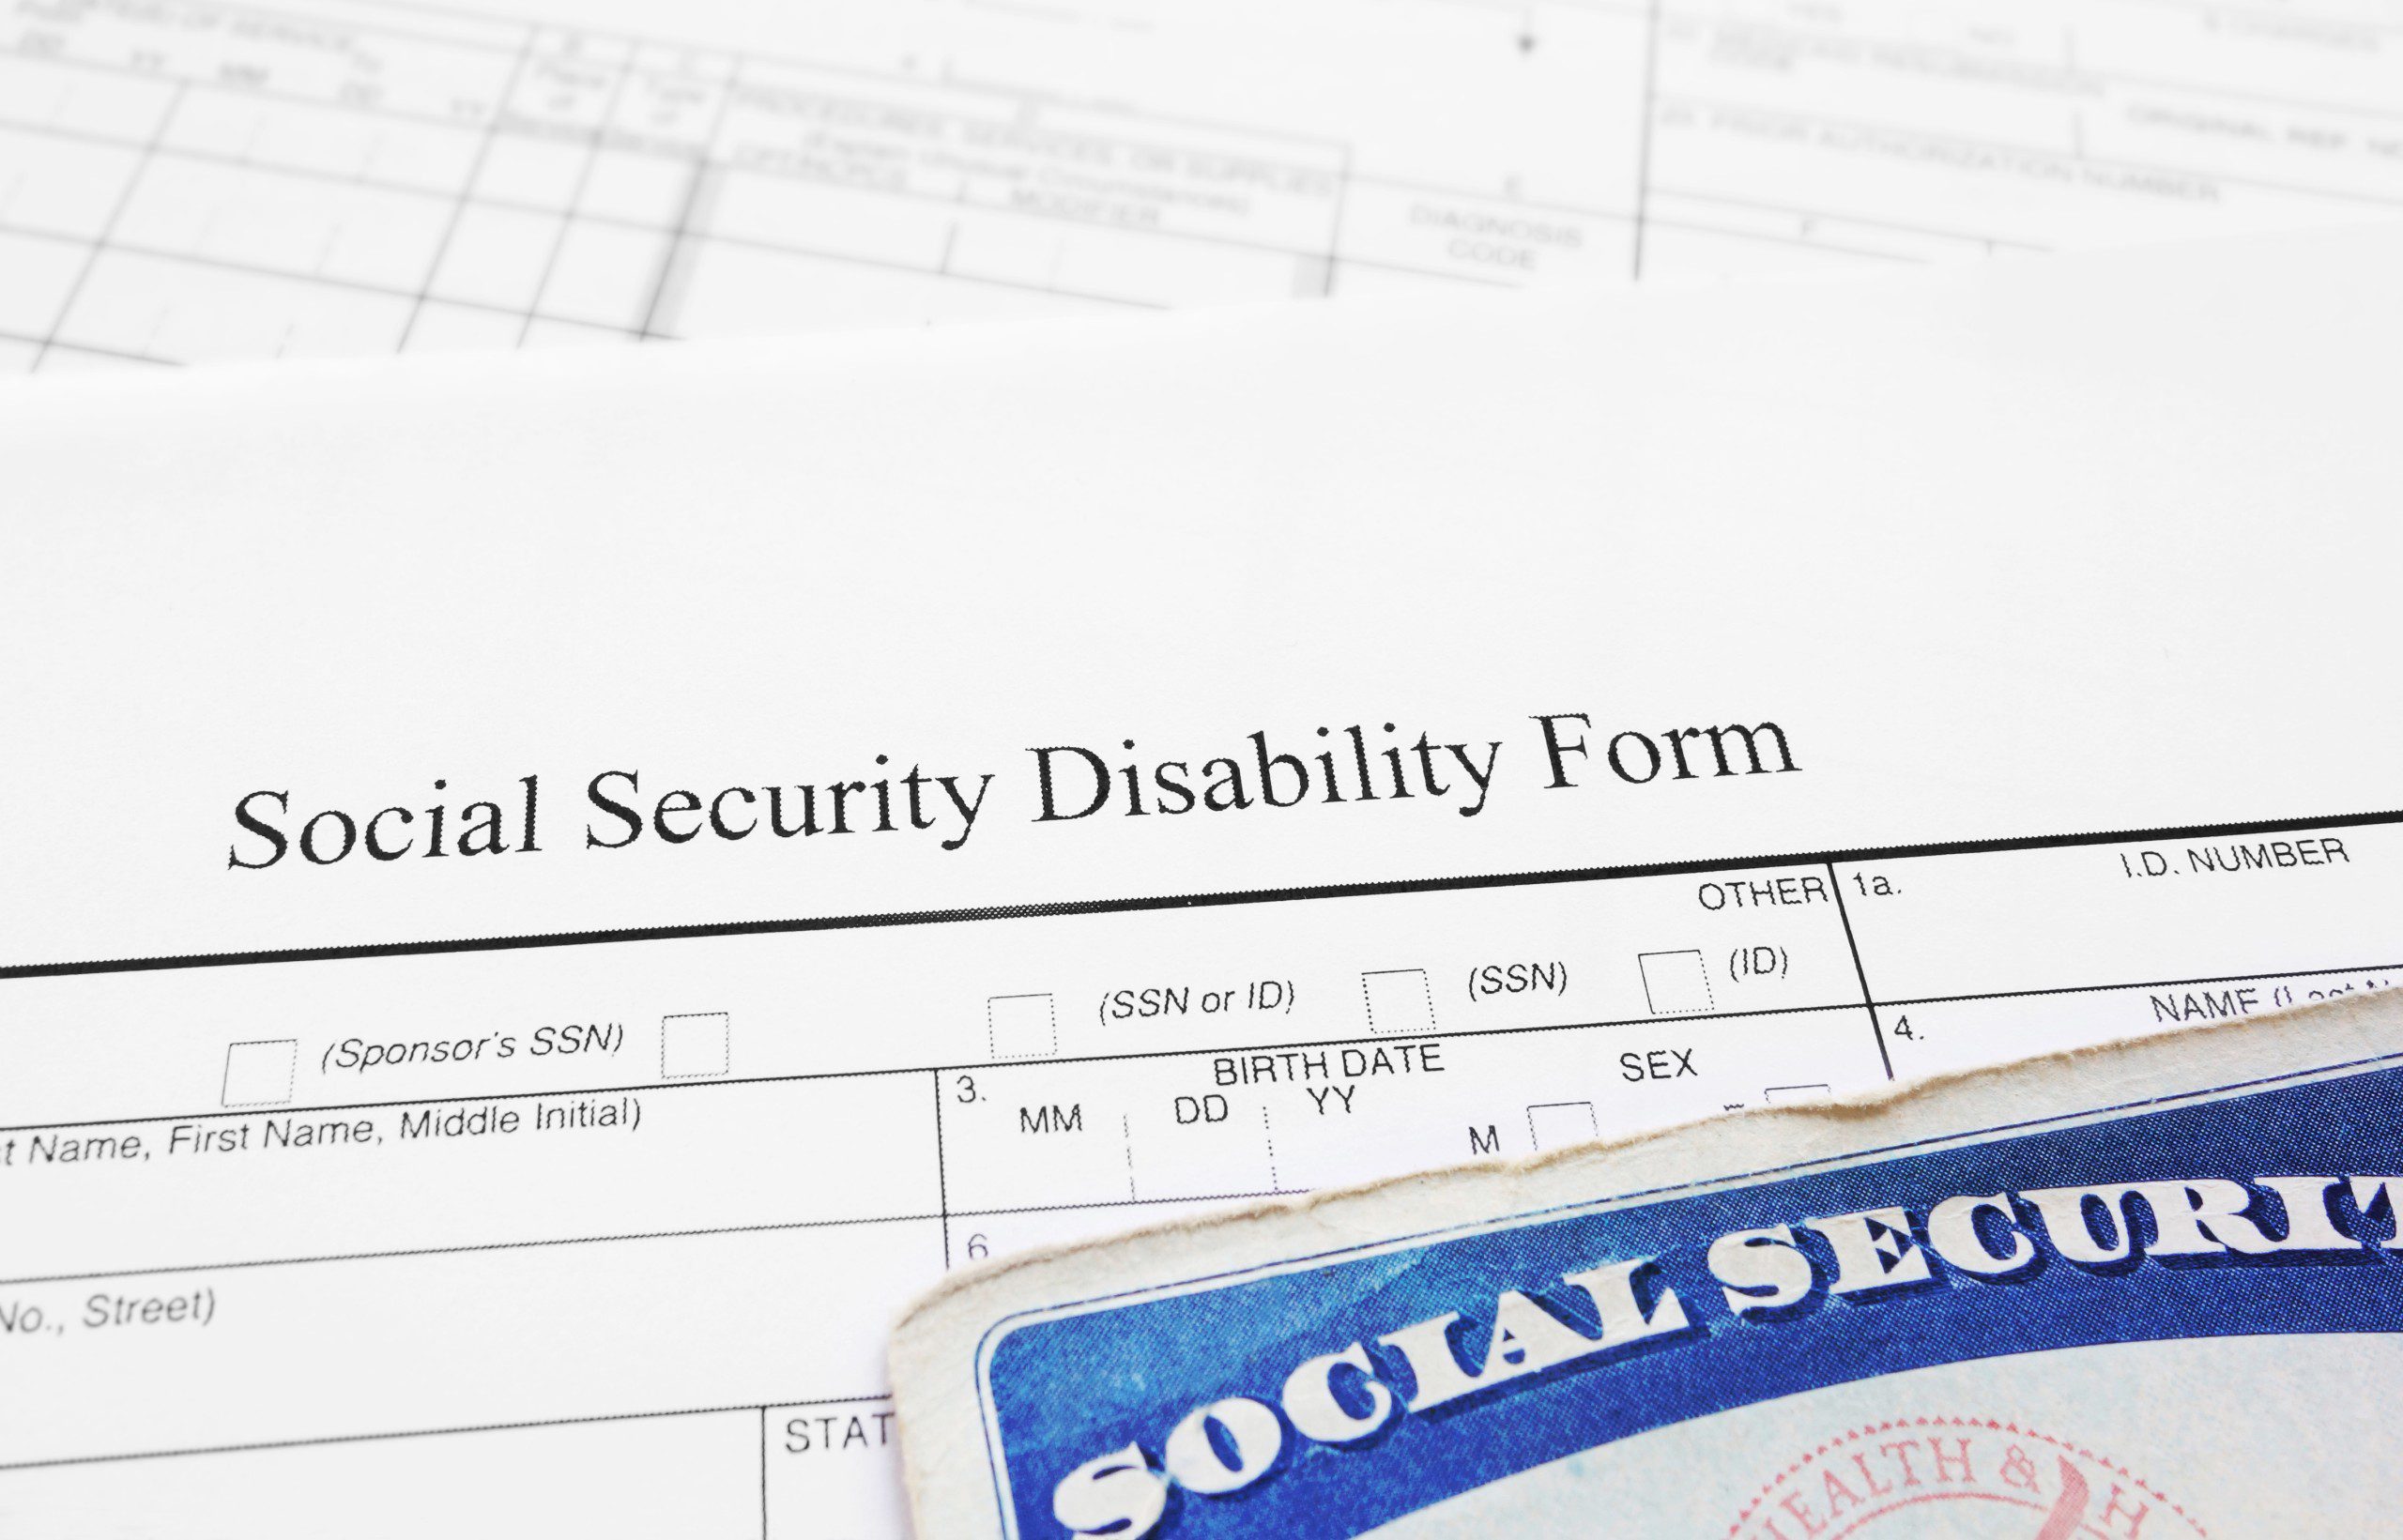 Finding a Lawyer For a Social Security Disability Case